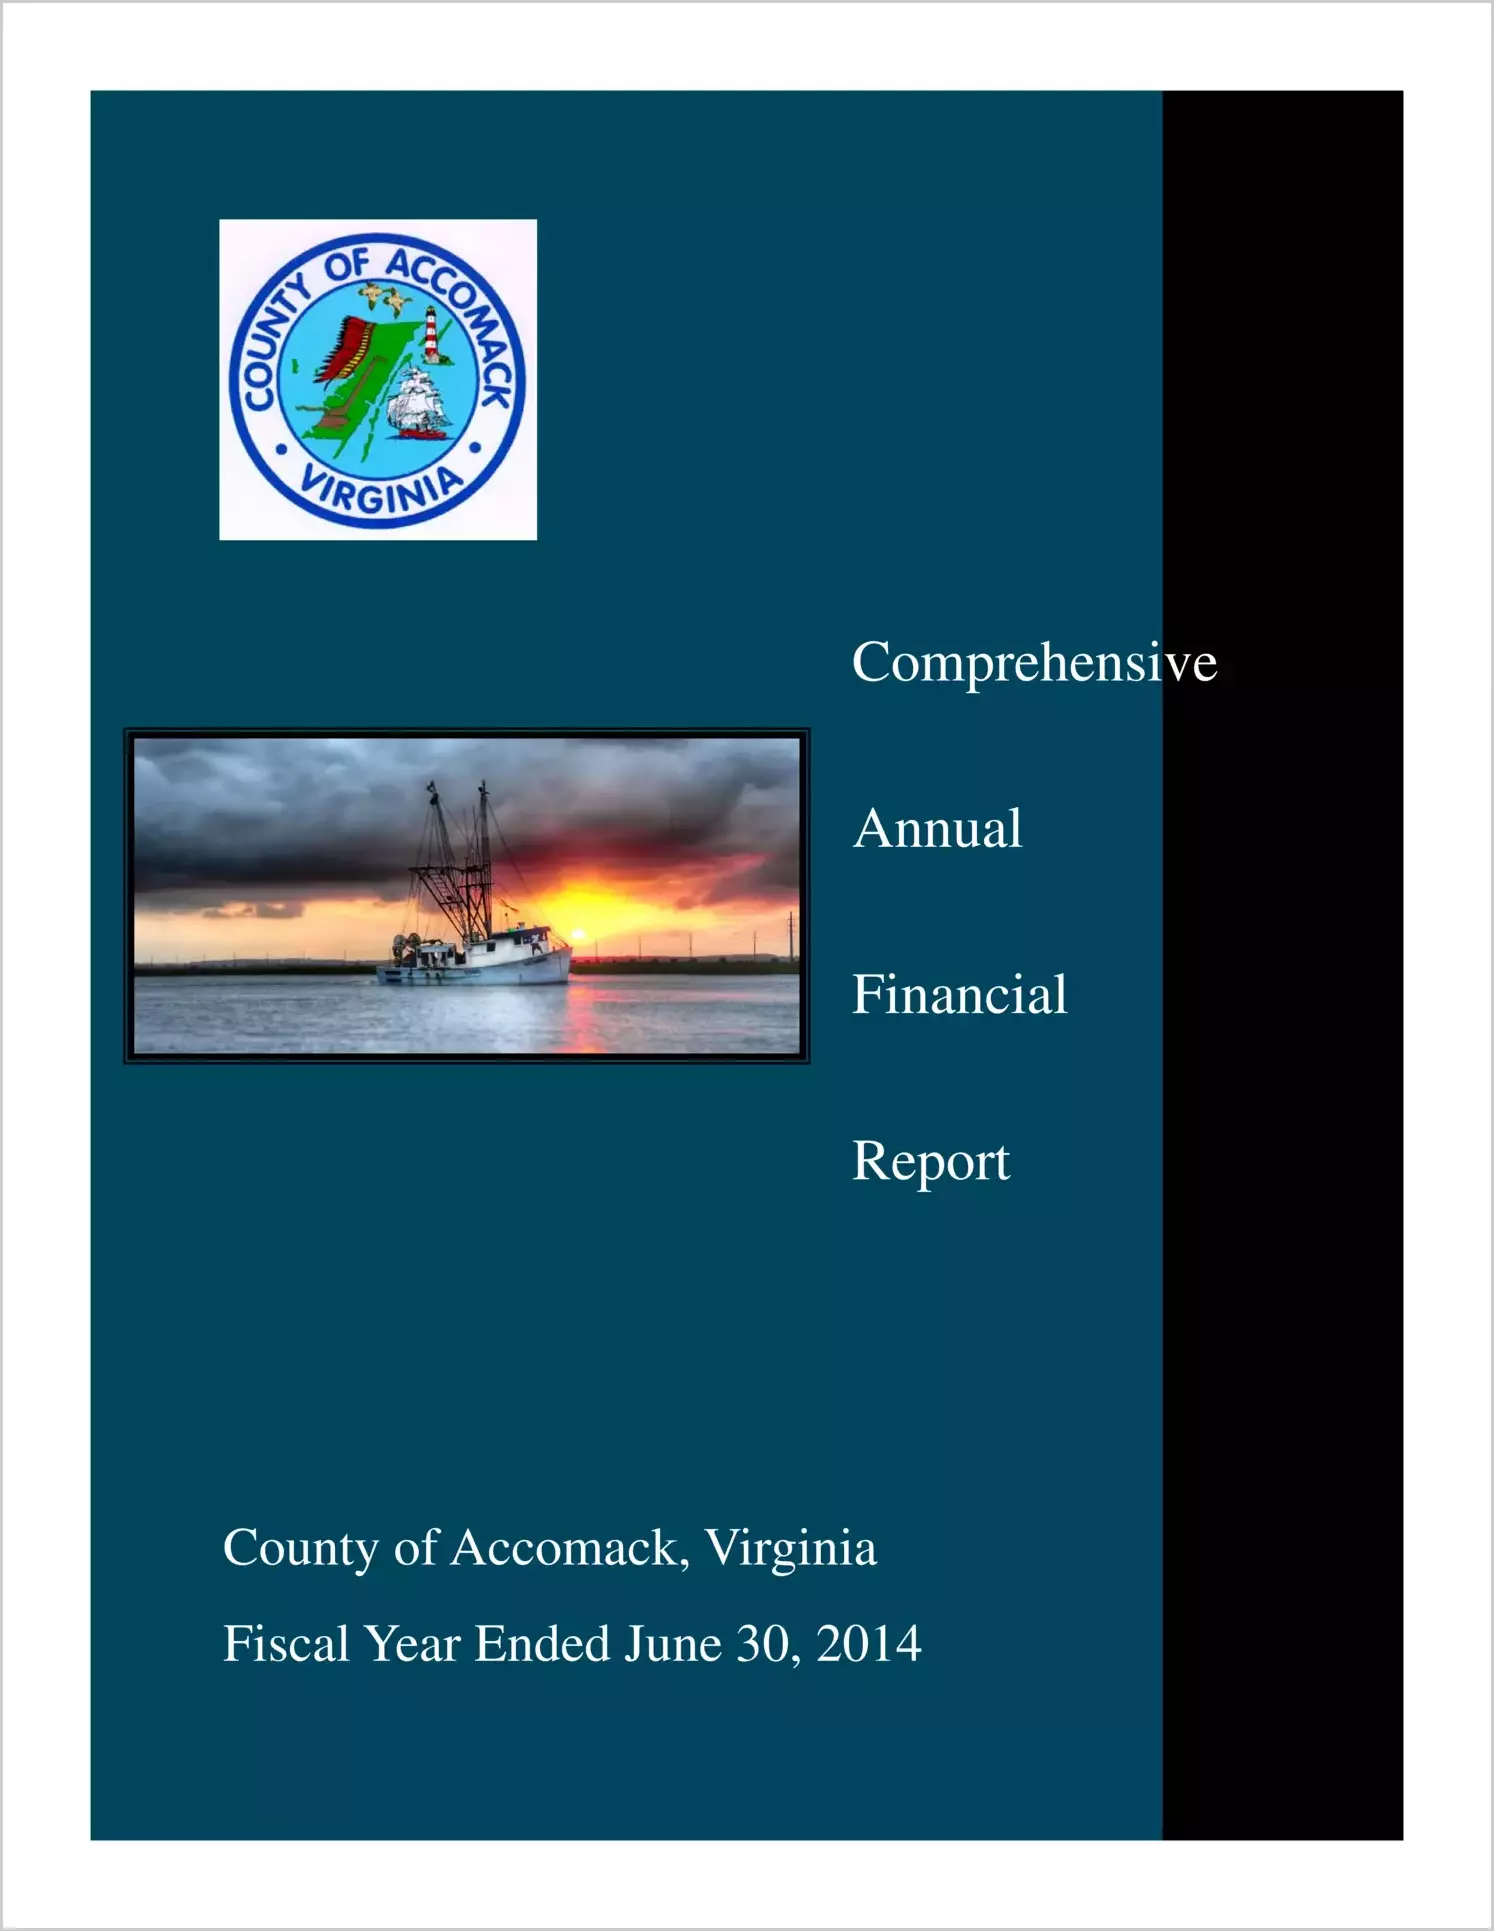 2014 Annual Financial Report for County of Accomack